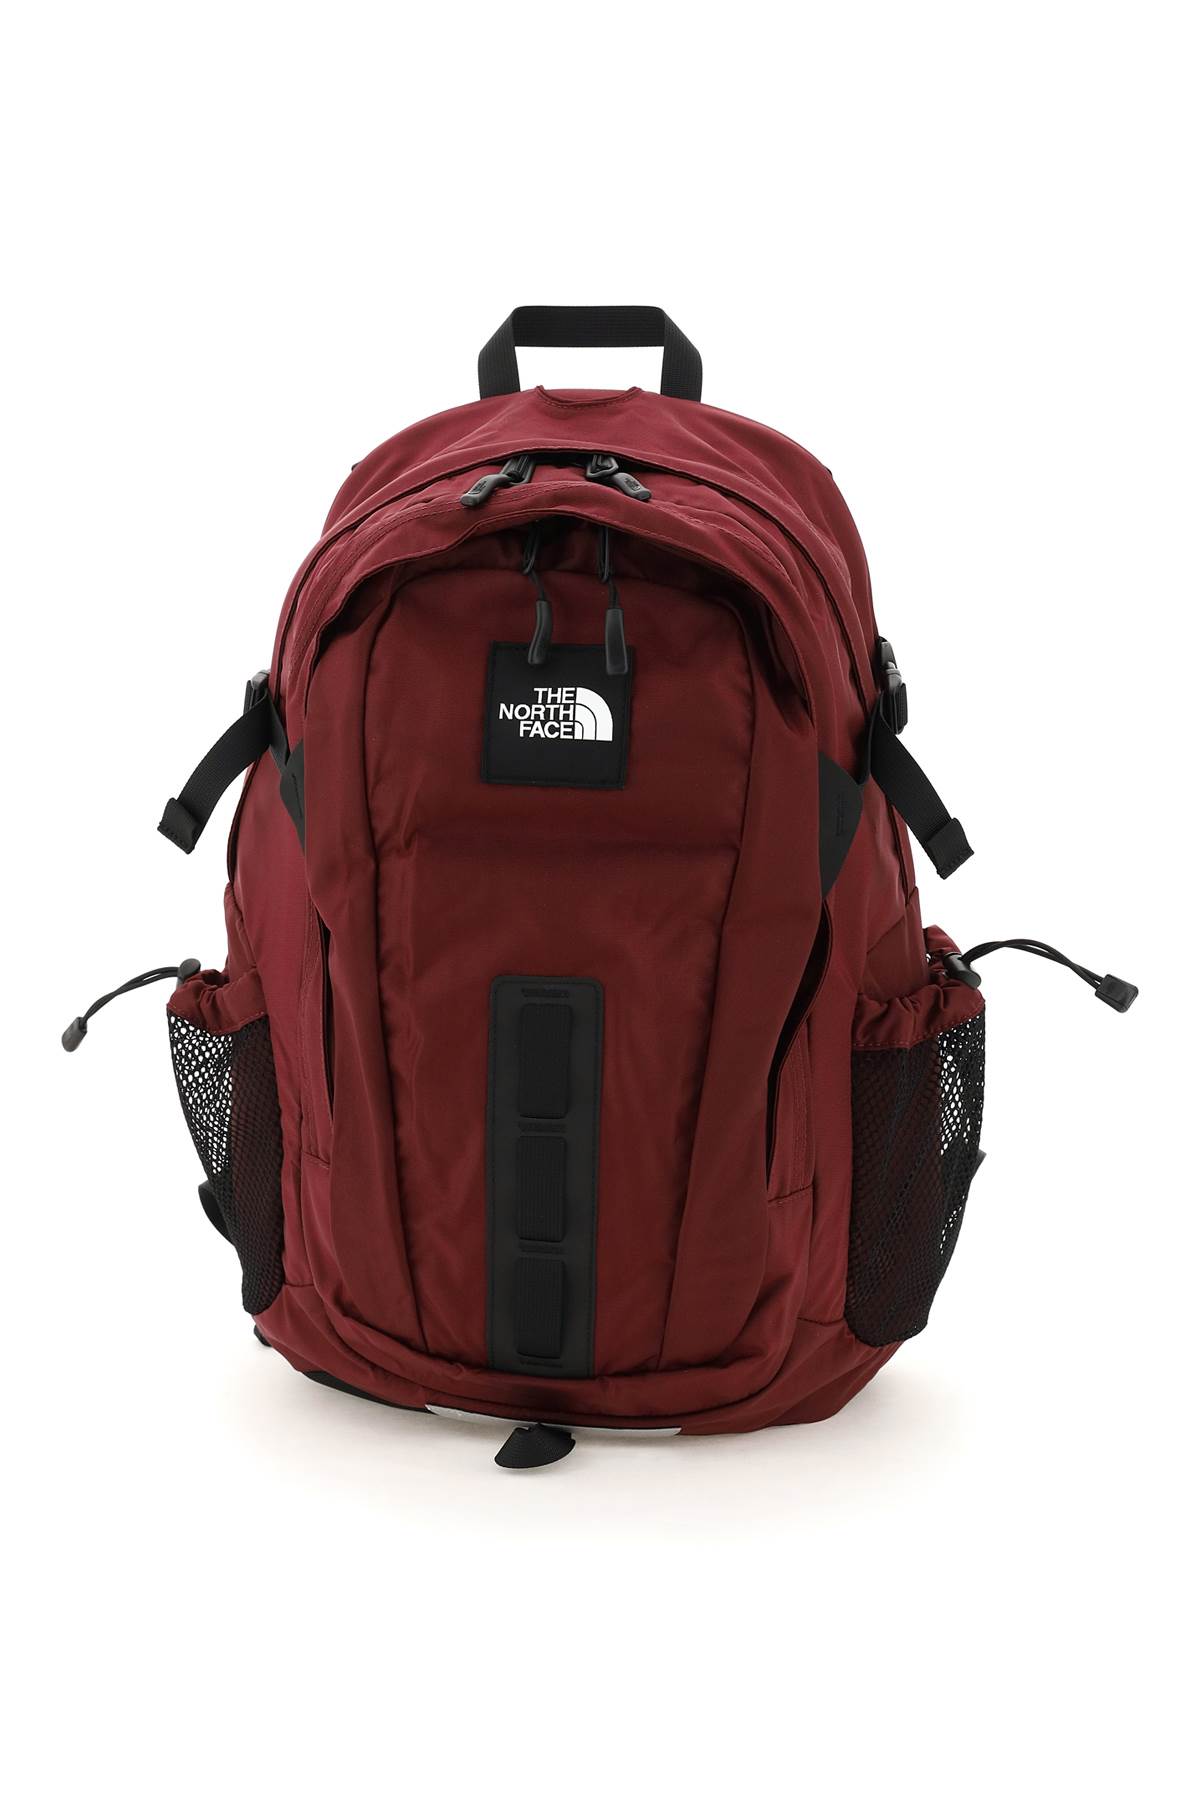 The North Face Hot Shot Special Edition Backpack